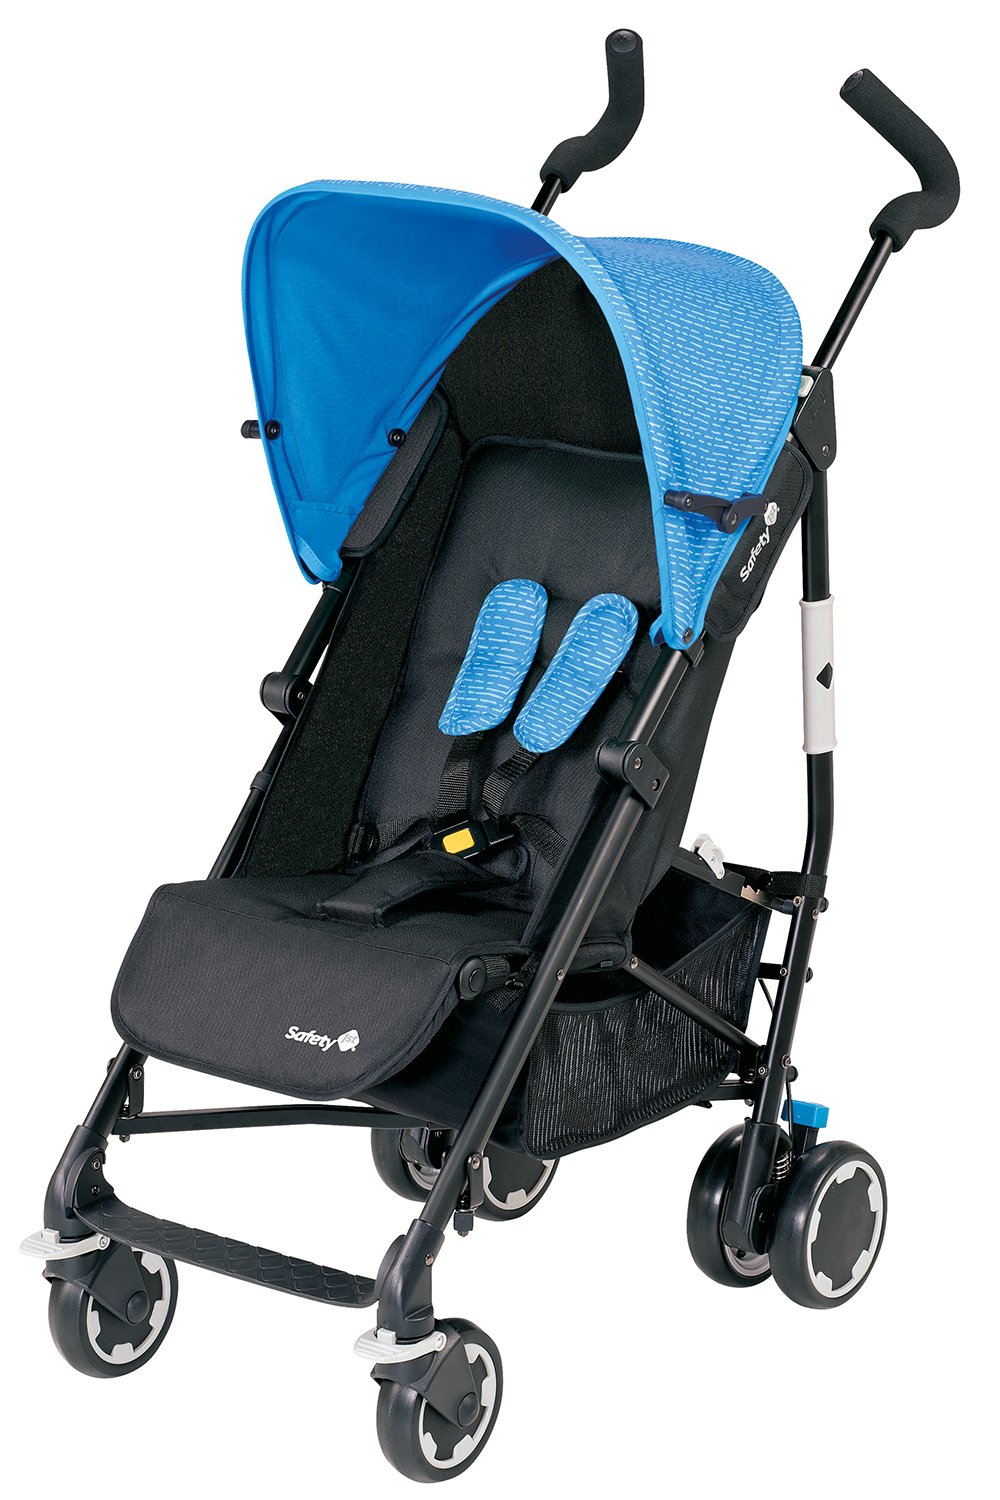 Safety 1st Compa City Pushchair blue